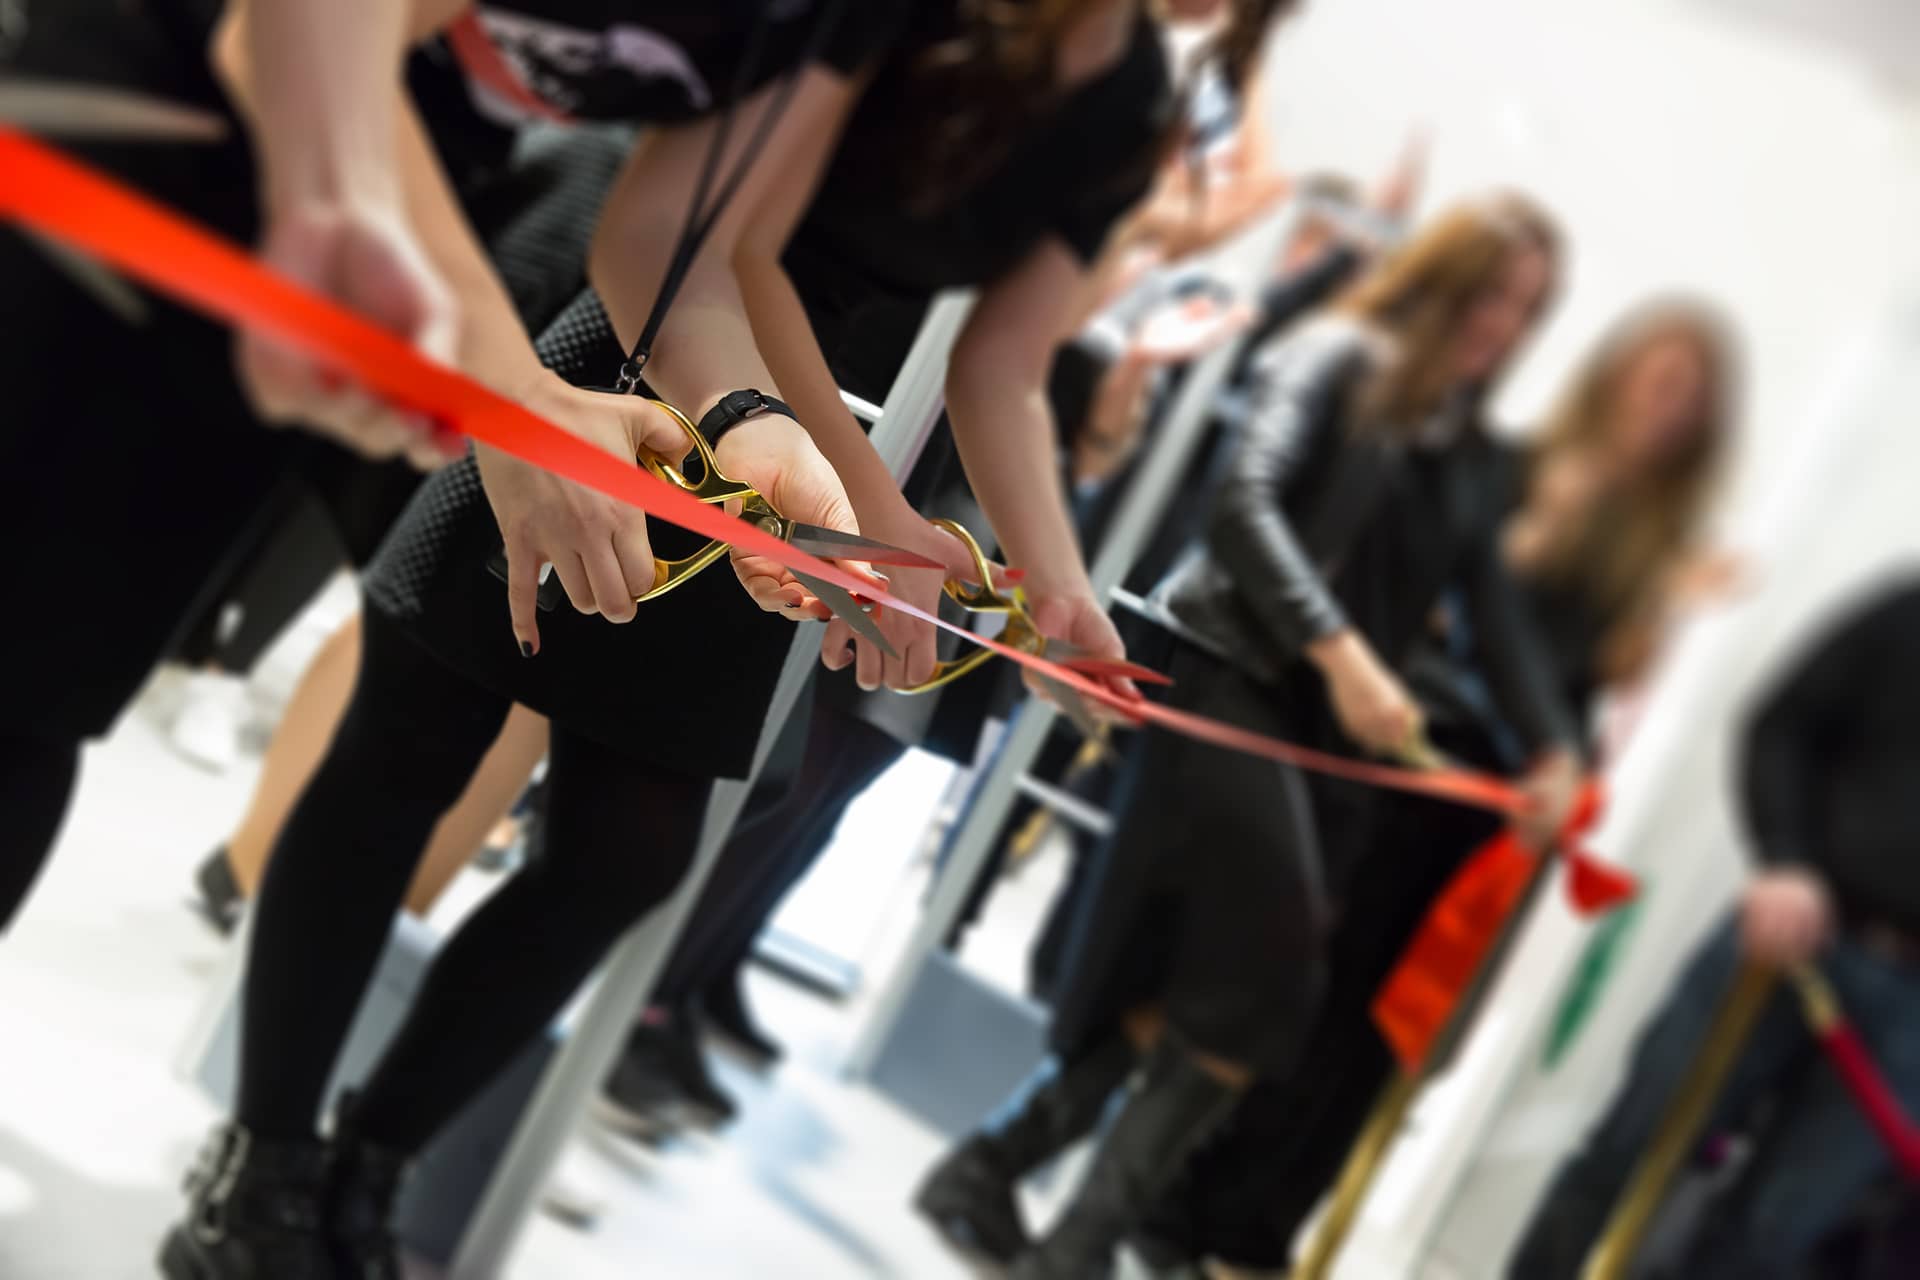 Store,Grand,Opening,-,Cutting,Red,Ribbon